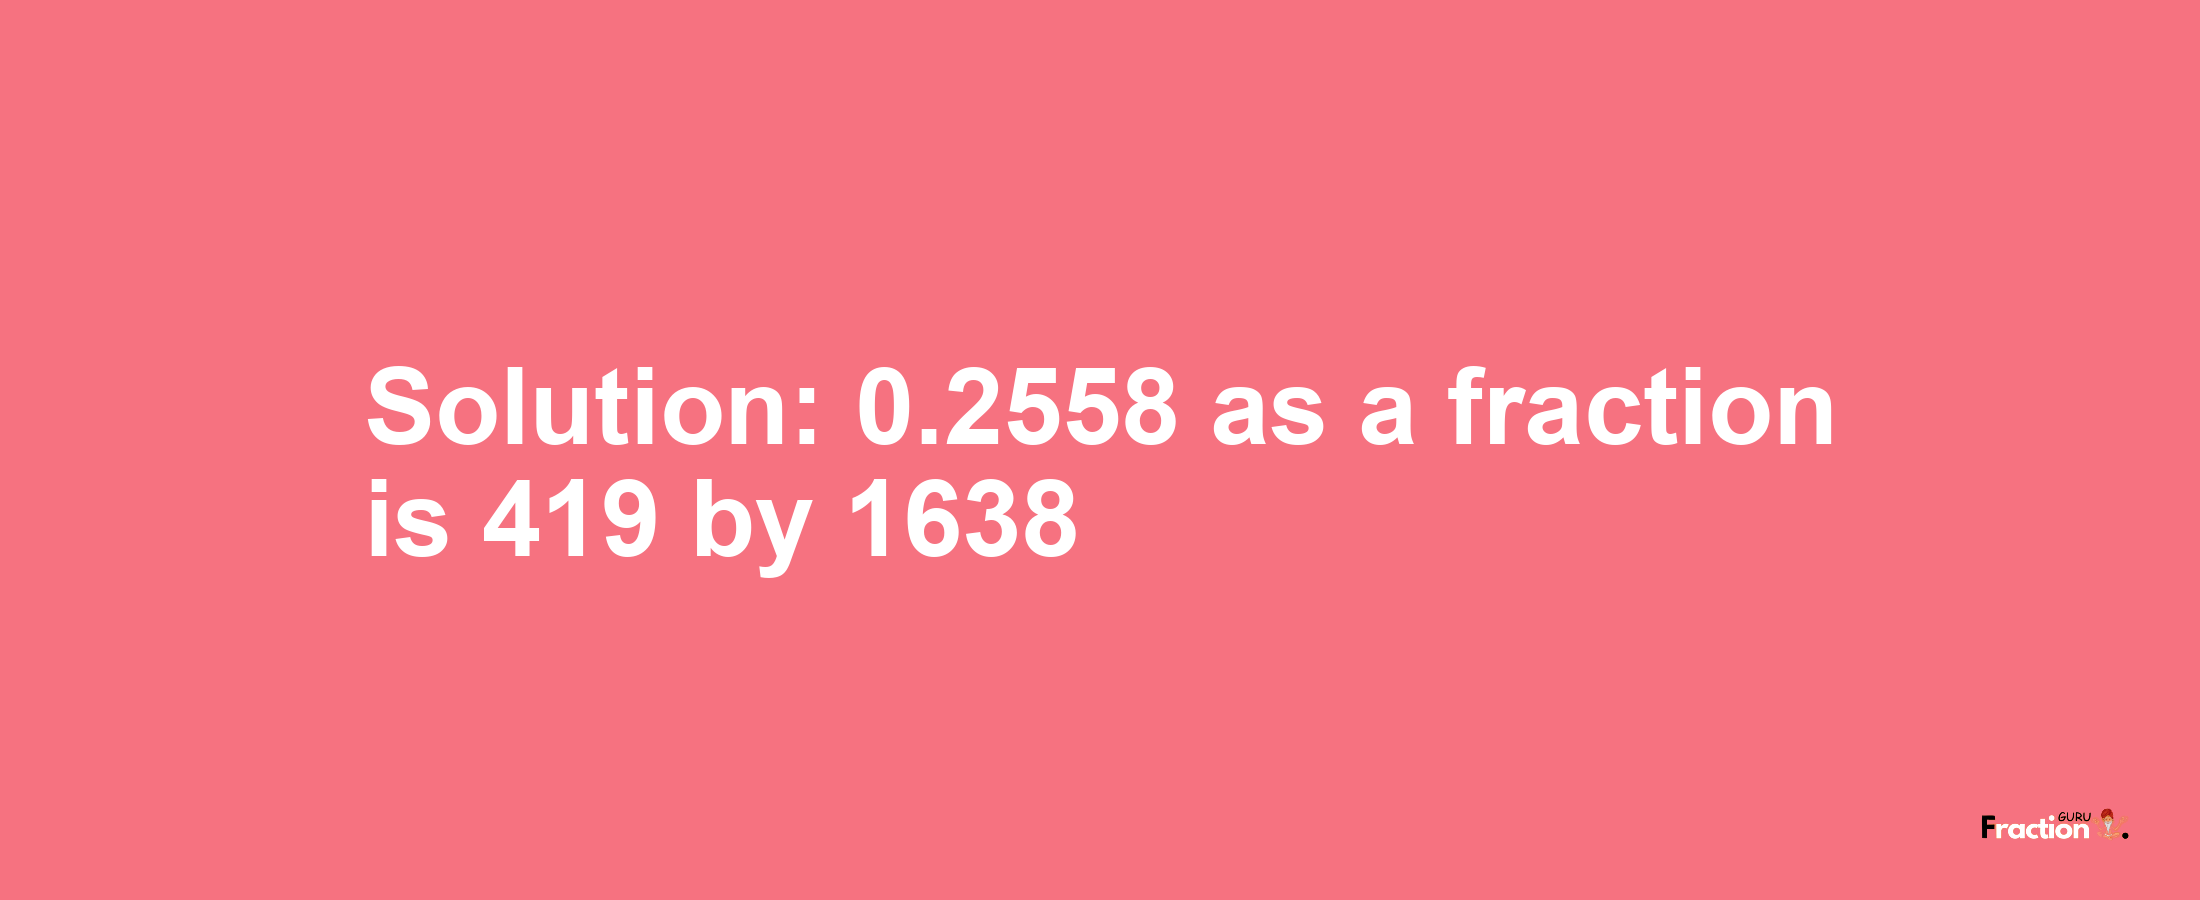 Solution:0.2558 as a fraction is 419/1638